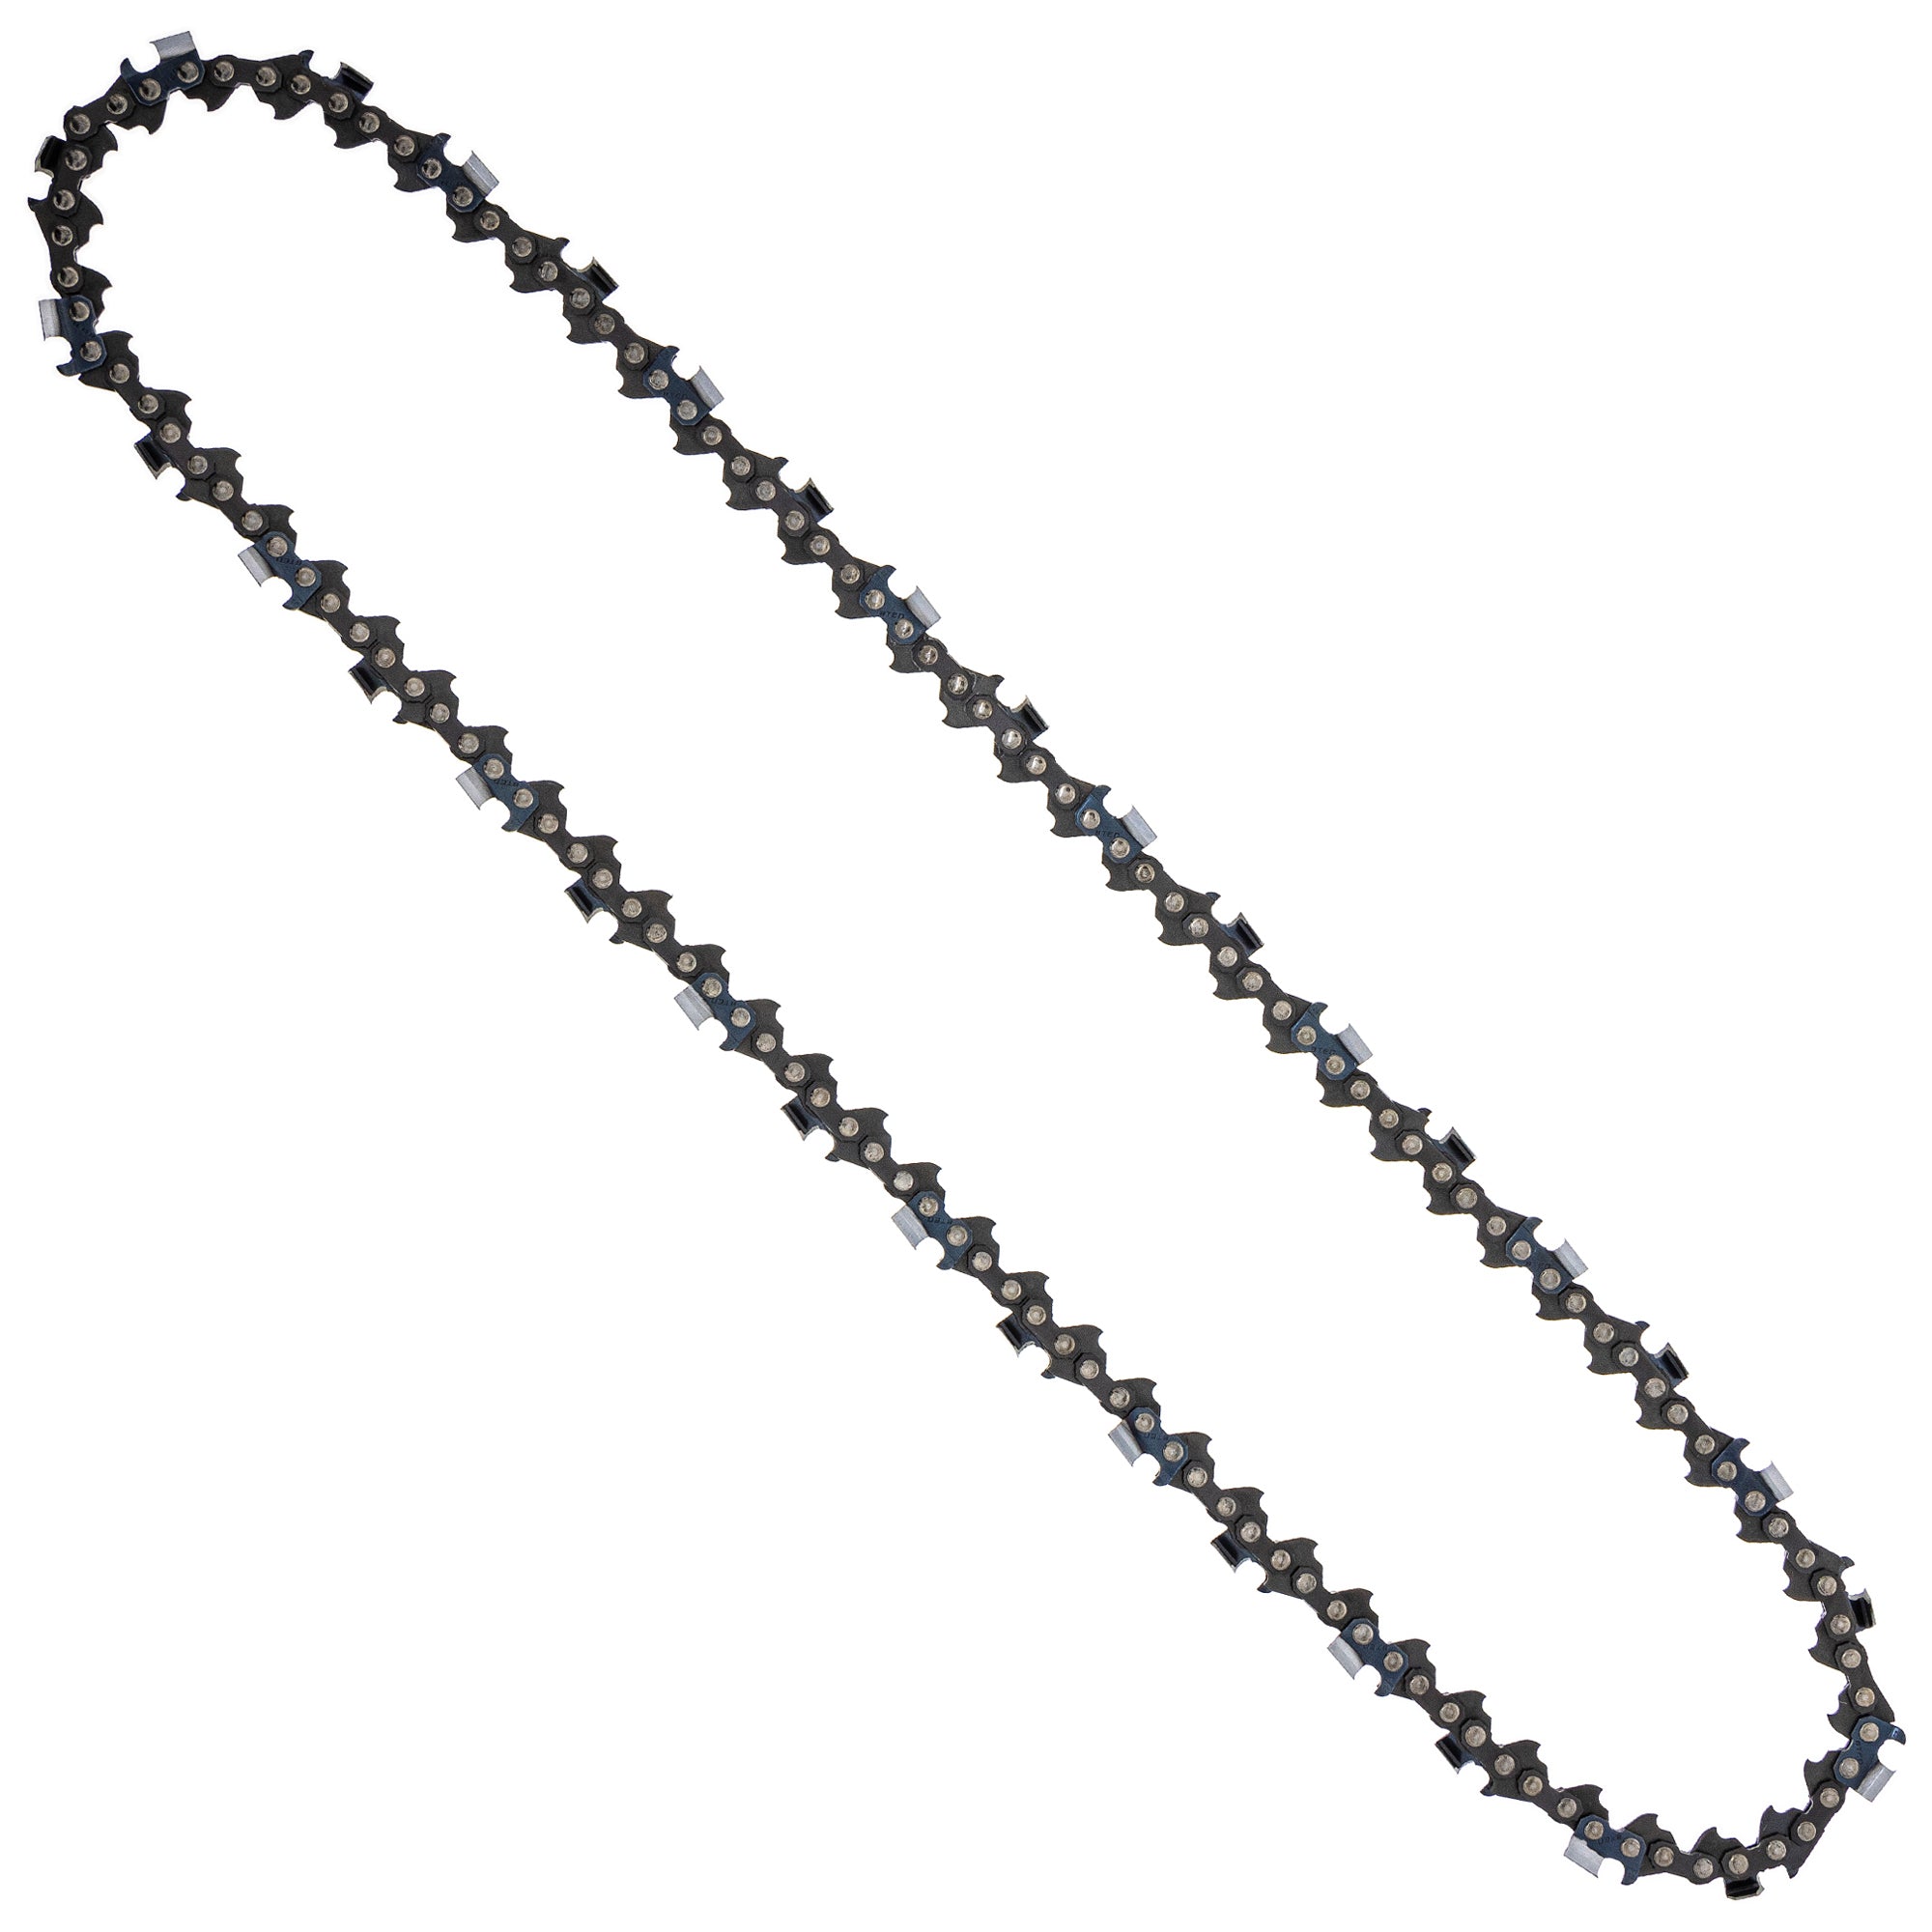 8TEN 810-CCC2218H Chain 5-Pack for zOTHER Oregon Husqvarna Poulan